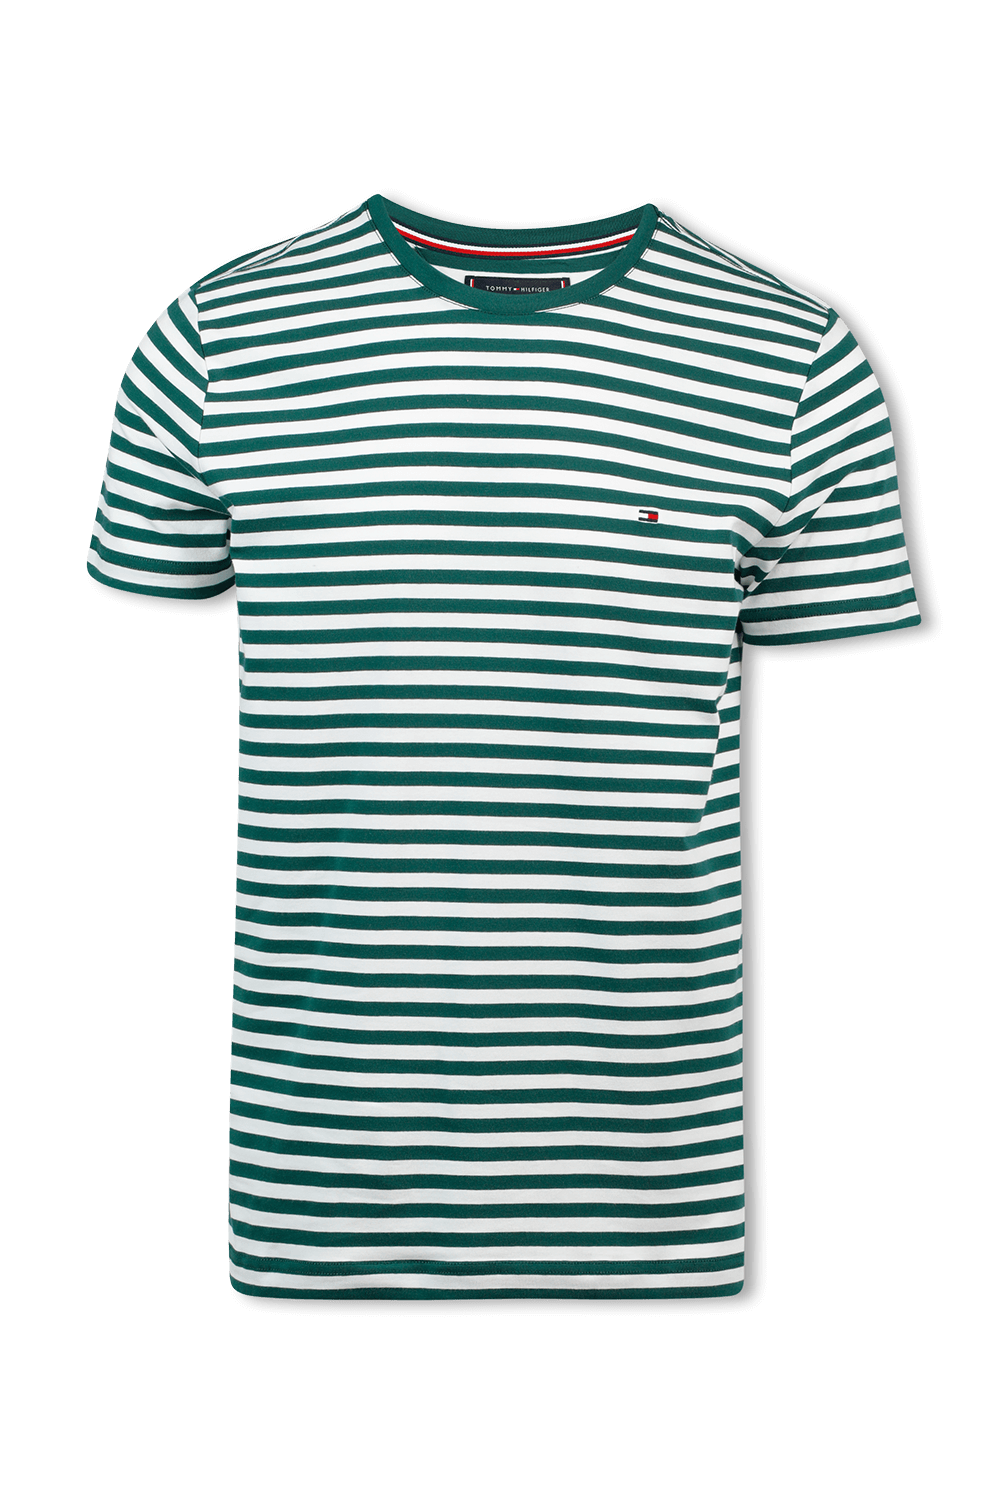 Strip Slim Fit T-Shirt in Green ans White TOMMY HILFIGER